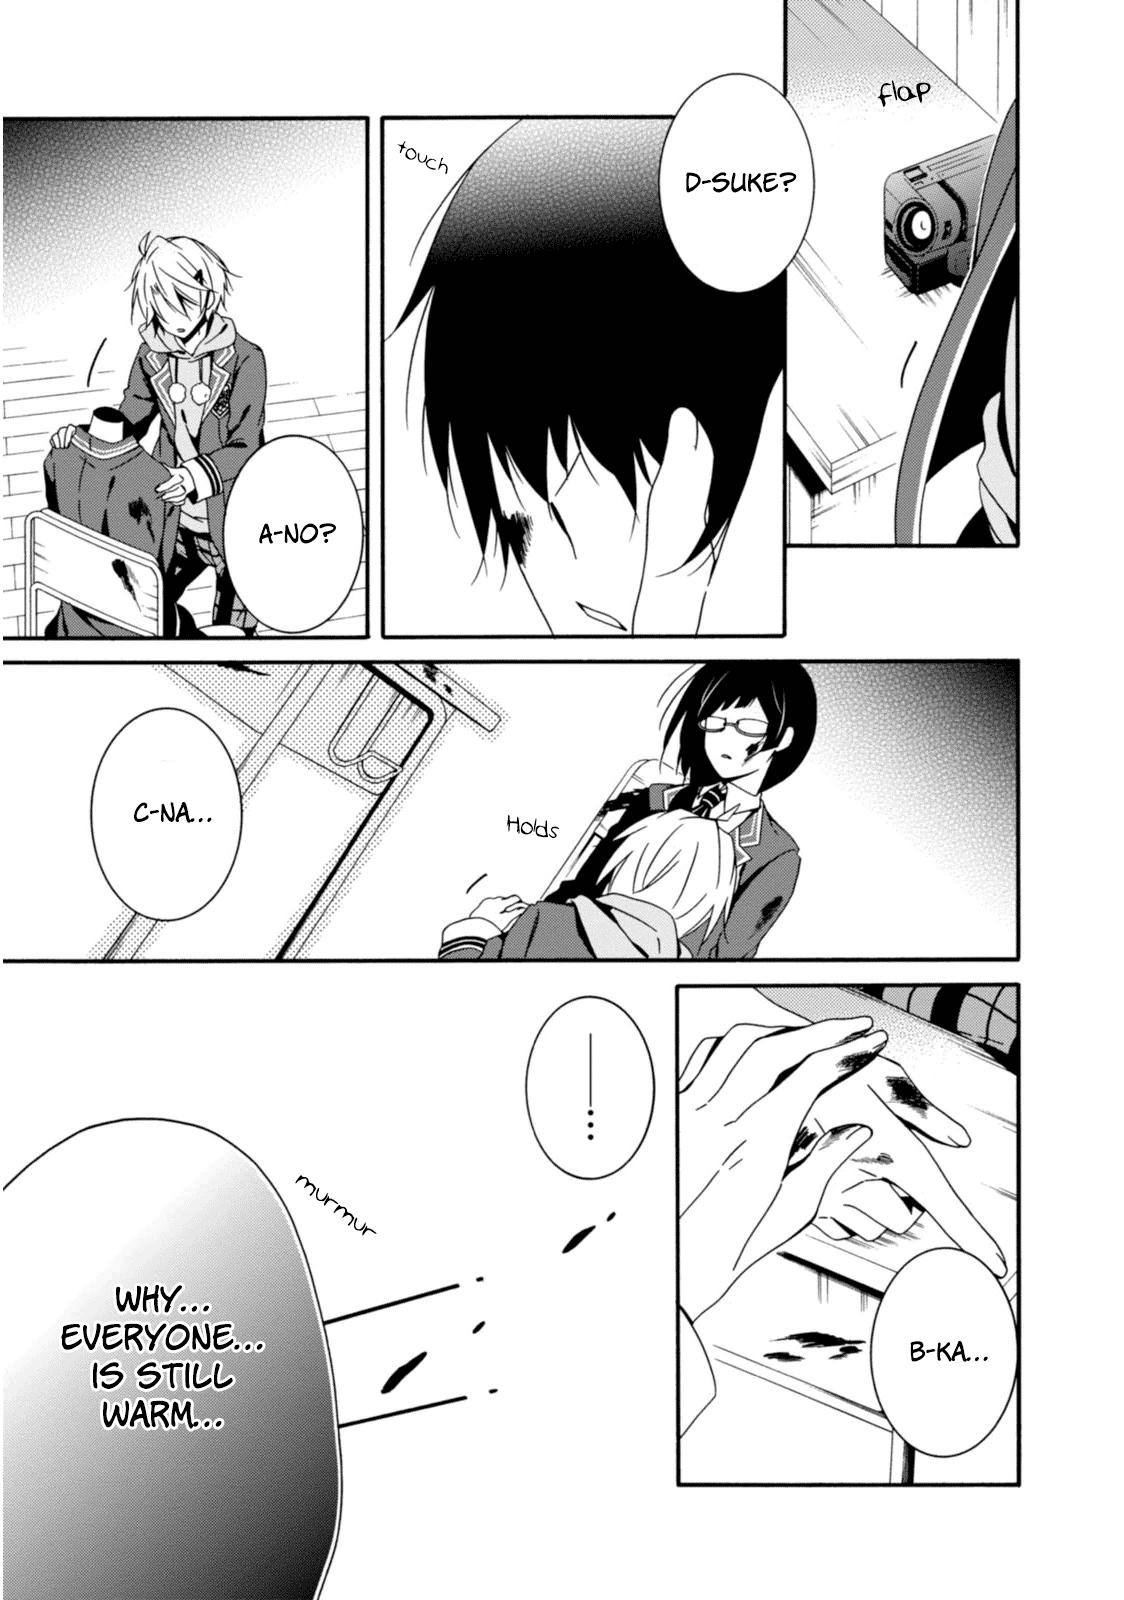 Shuuen no Shiori Vol. 7 Ch. 30 Schrödinger's Cat is Crying There (2)